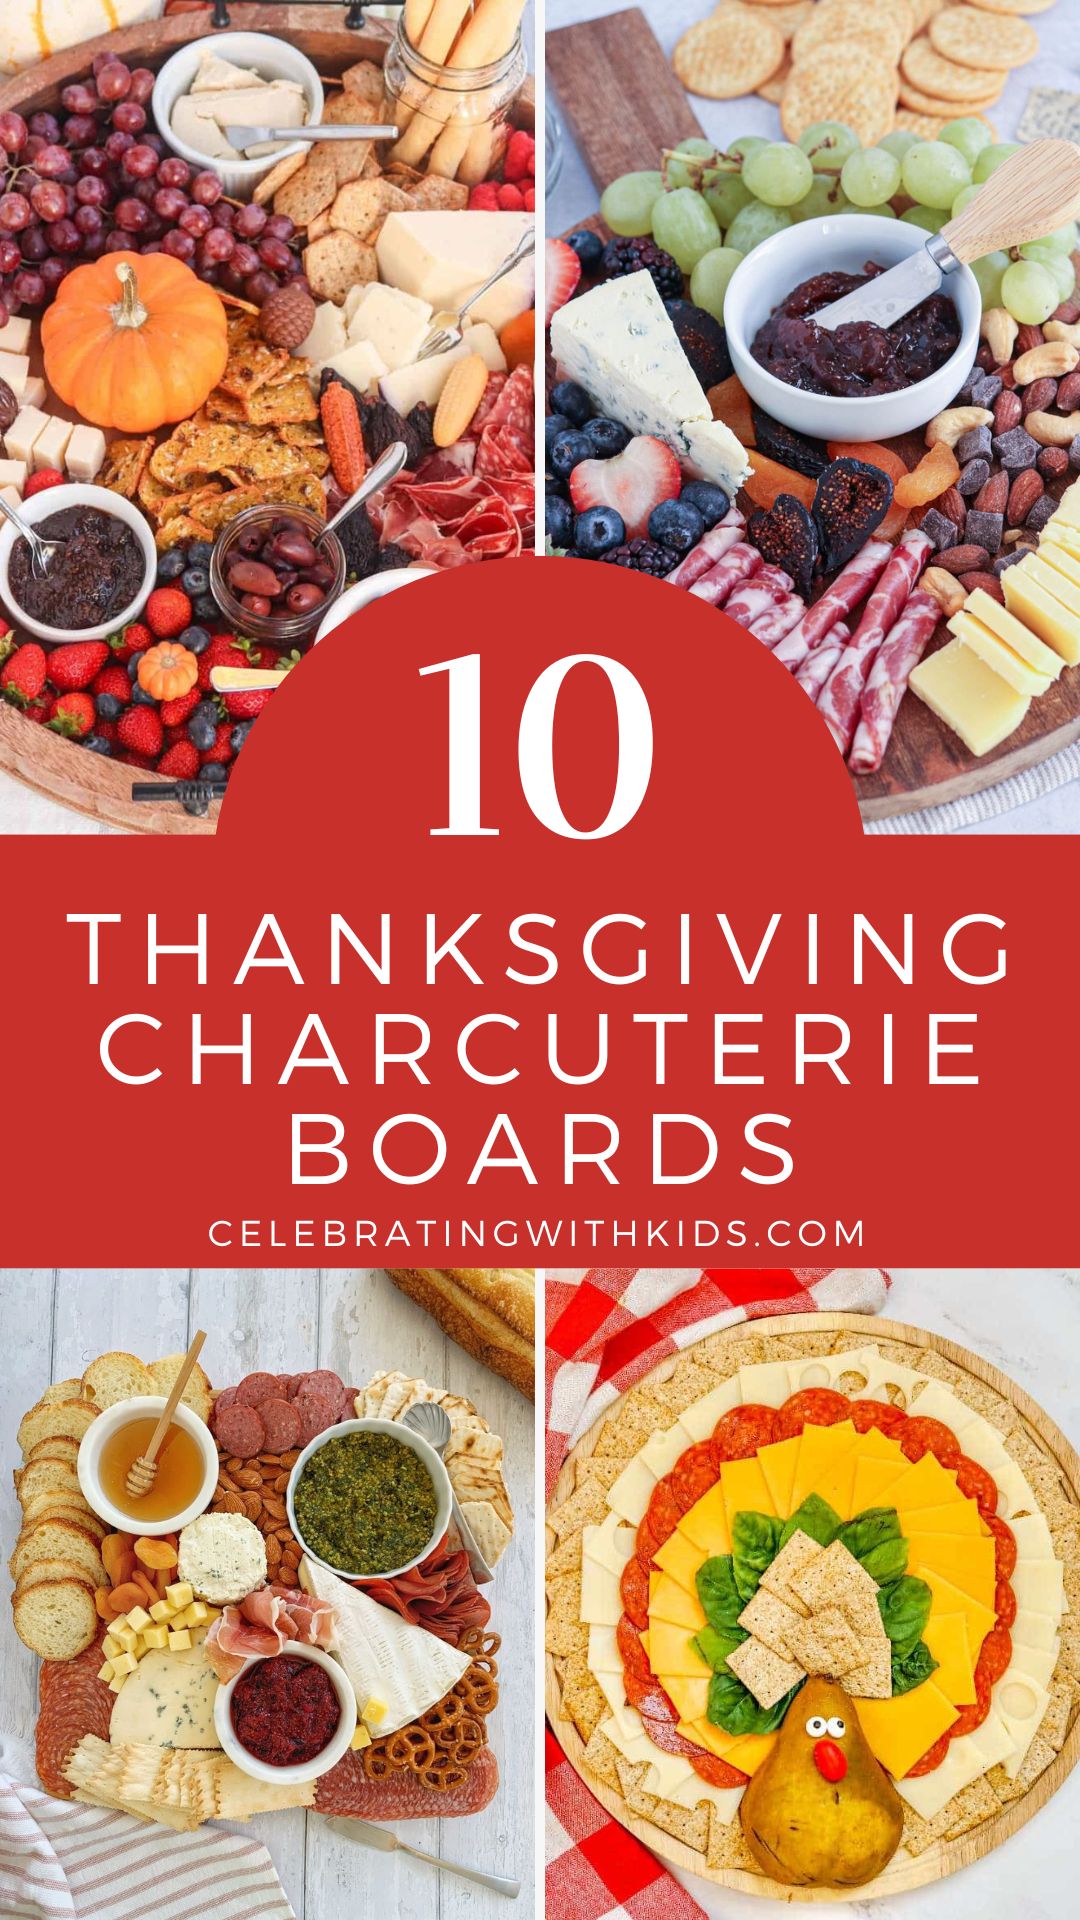 Thanksgiving Charcuterie Boards.